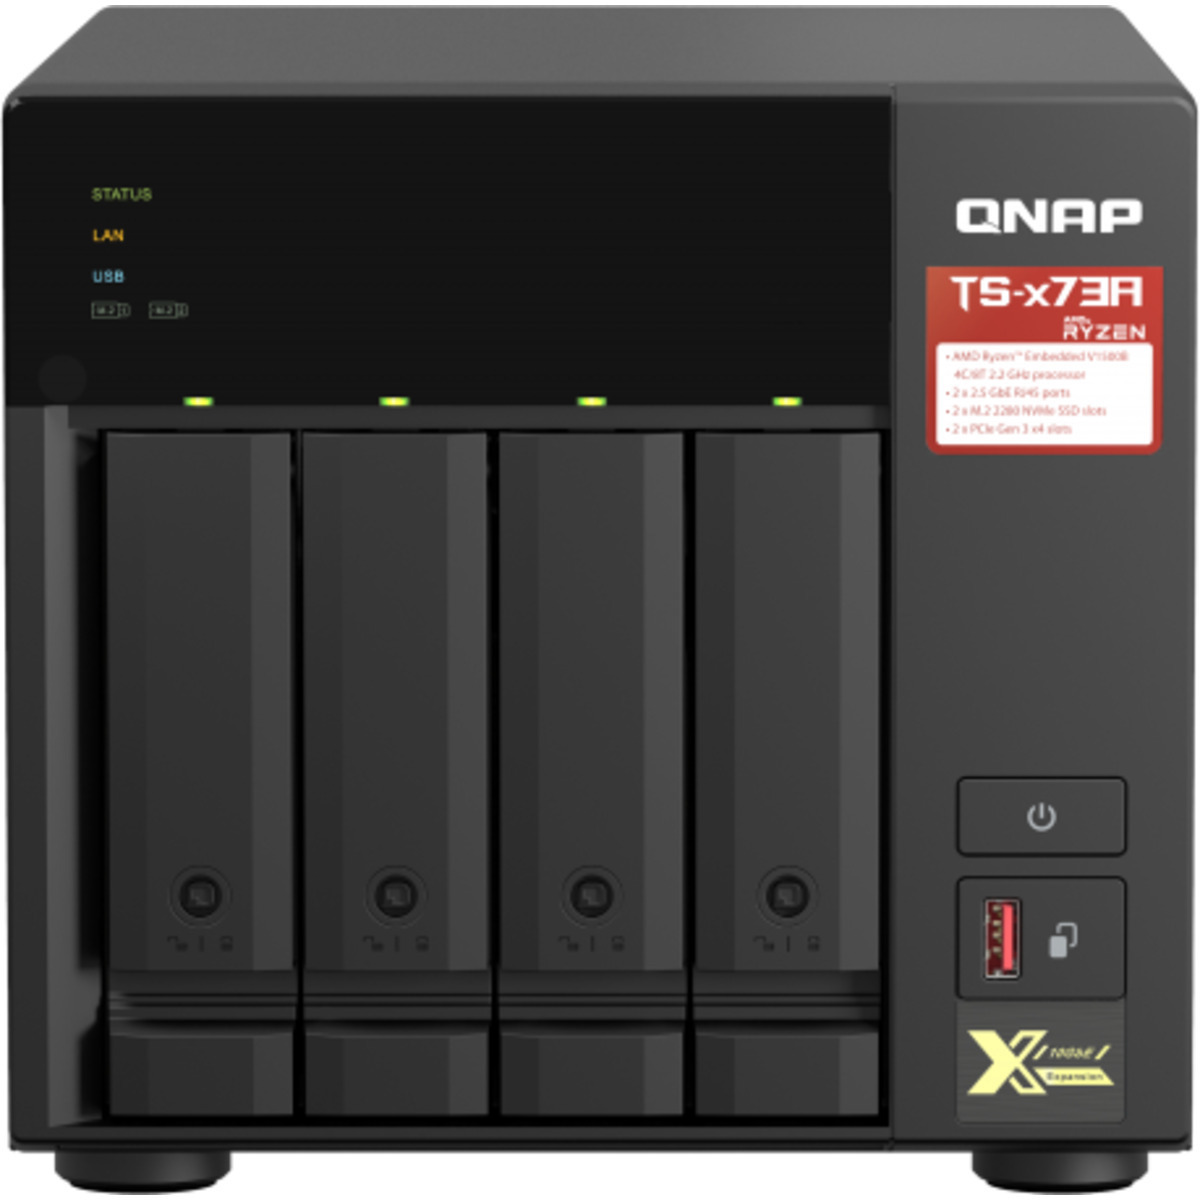 QNAP TS-473A 4tb 4-Bay Desktop Multimedia / Power User / Business NAS - Network Attached Storage Device 2x2tb Western Digital Red SA500 WDS200T1R0A 2.5 560/530MB/s SATA 6Gb/s SSD NAS Class Drives Installed - Burn-In Tested TS-473A